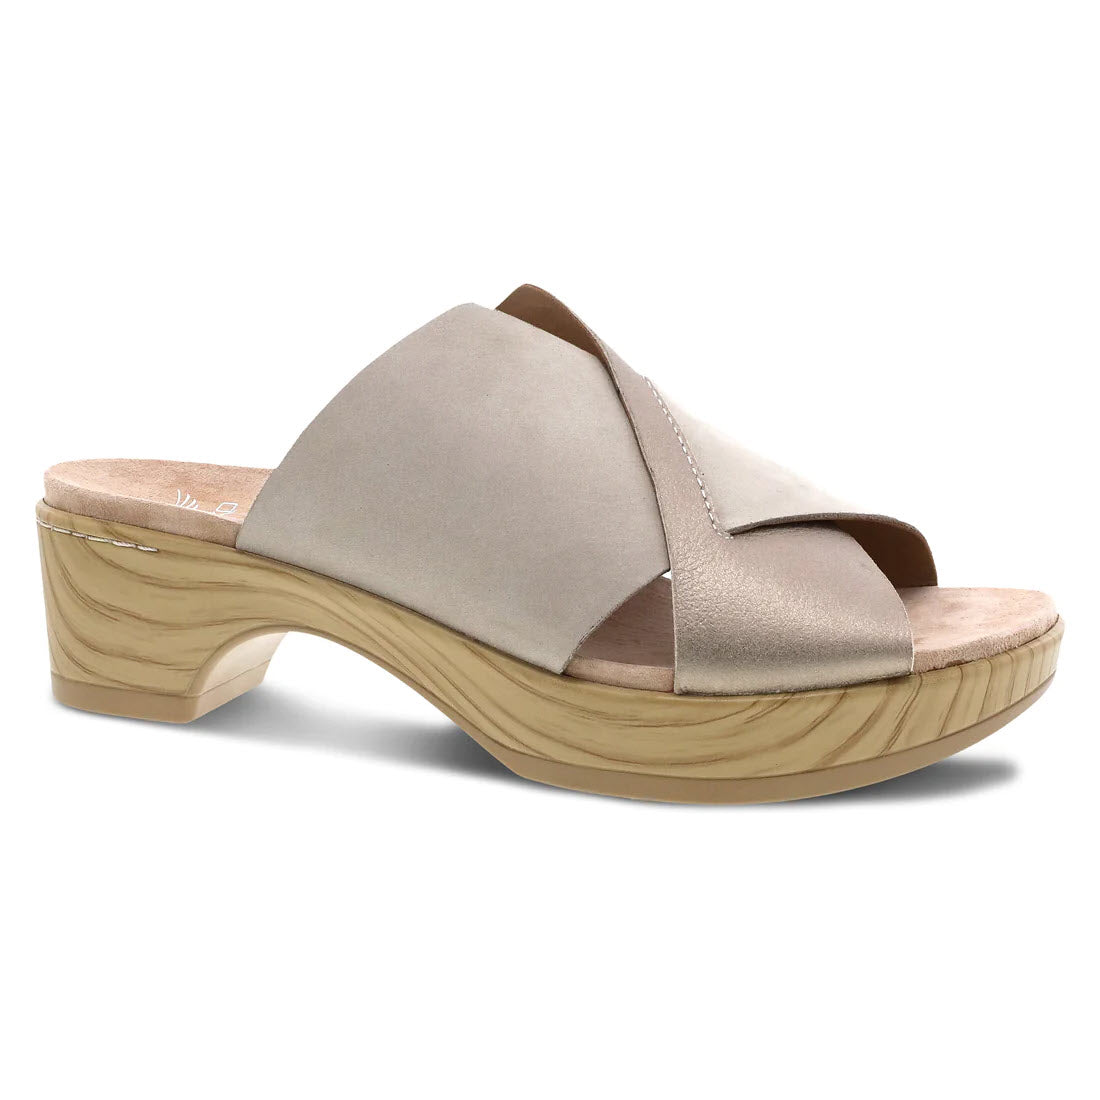 A beige leather slide sandal with a wide band and a wooden platform heel, isolated on a white background, Dansko Miri Sand Multi - Womens.